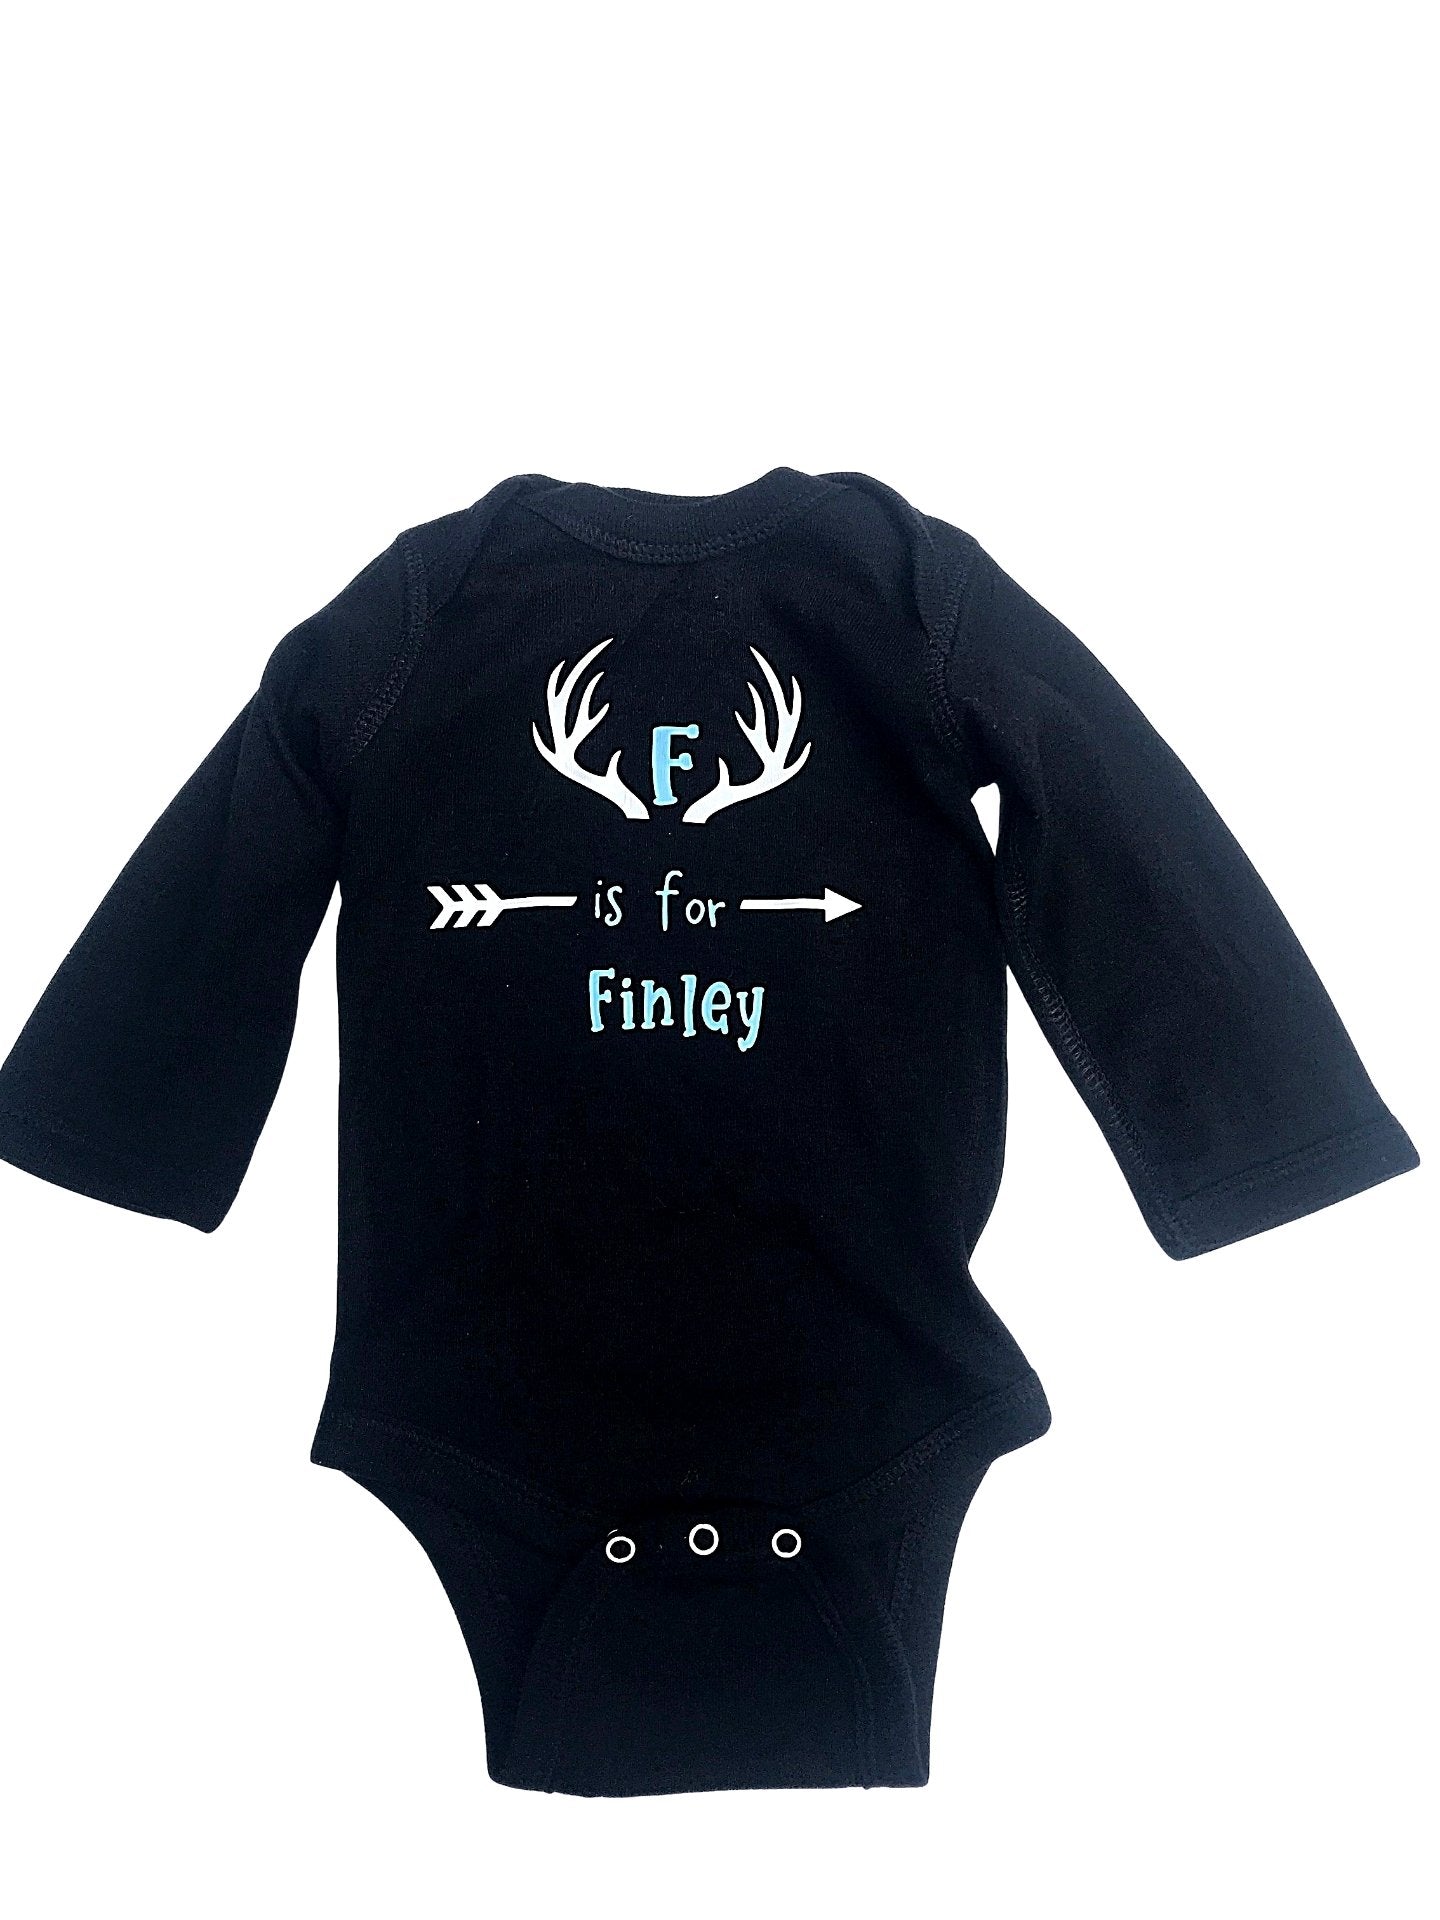 Monogrammed Baby Bodysuit, Baby shower gift, Personalized Baby shower gift